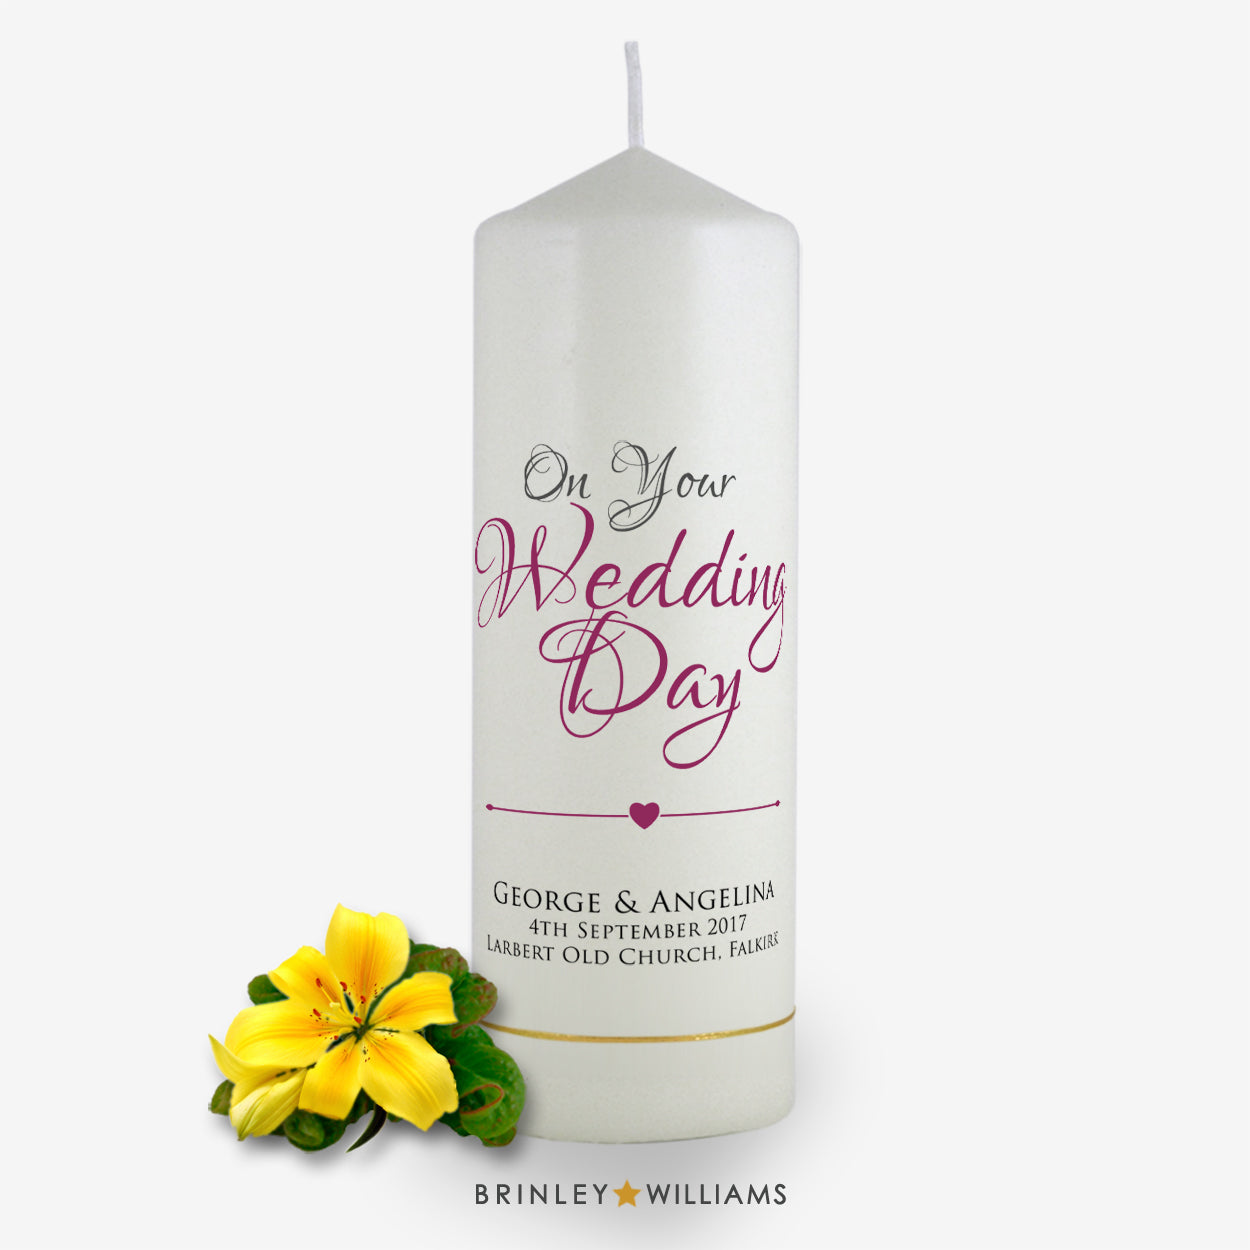 On your Wedding Day Personalised  Candle - Burgundy